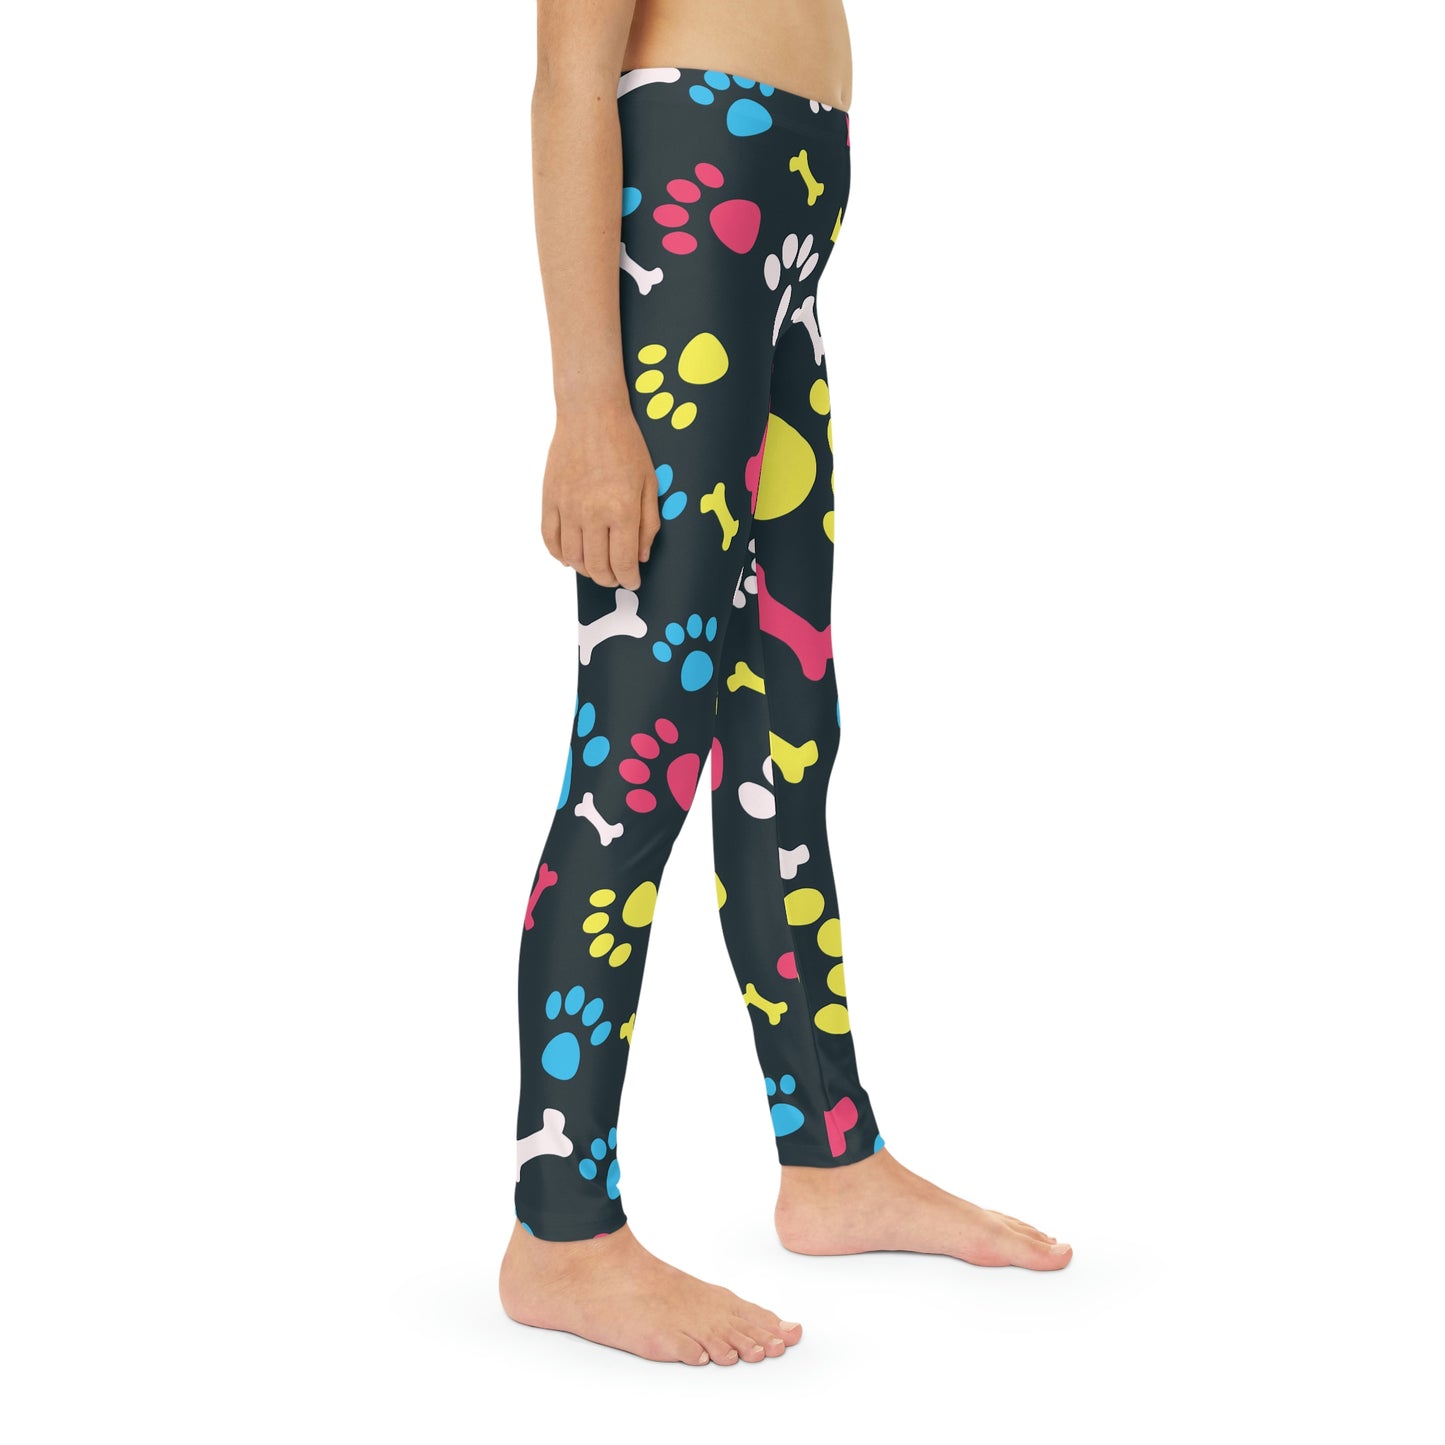 Dog Lovers Youth Leggings,  One of a Kind Gift - Unique Workout Activewear tights for  kids fitness, Daughter, Niece  Christmas Gift